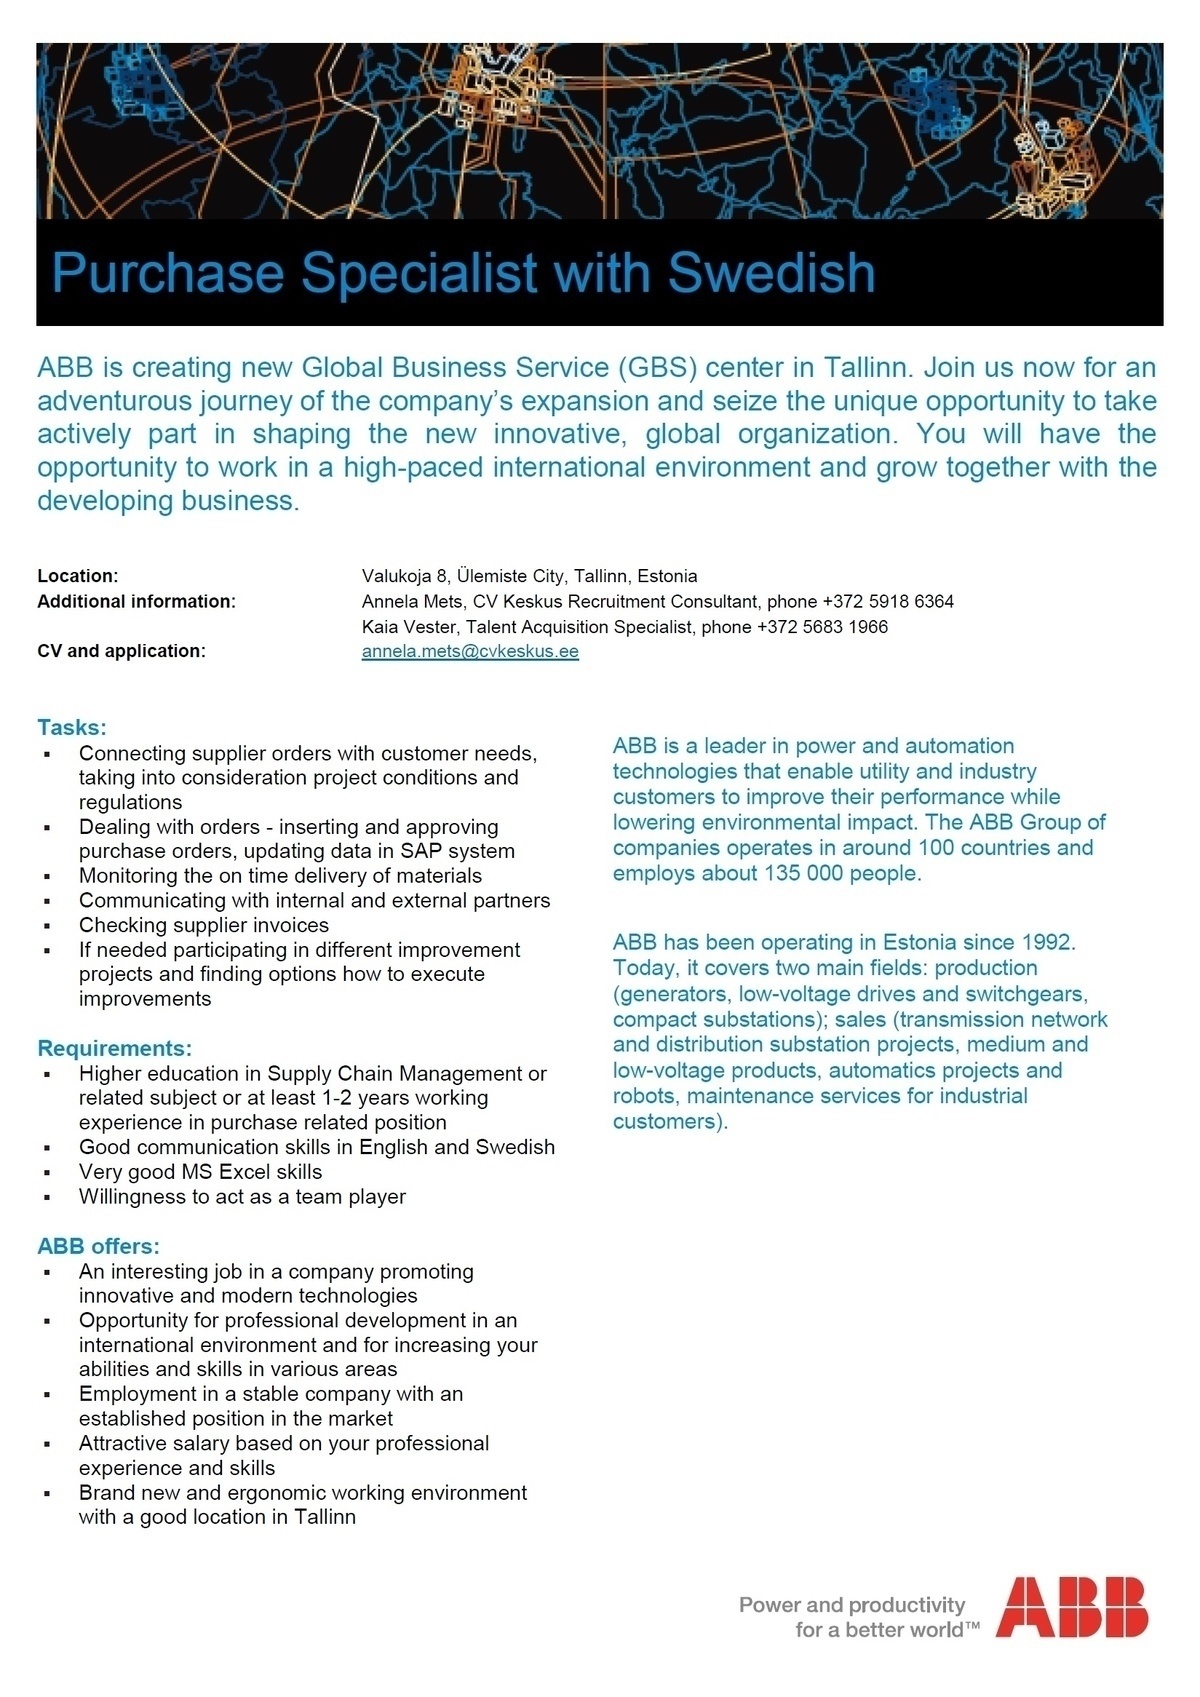 CV Keskus OÜ ABB is looking for a Purchase Specialist with Swedish